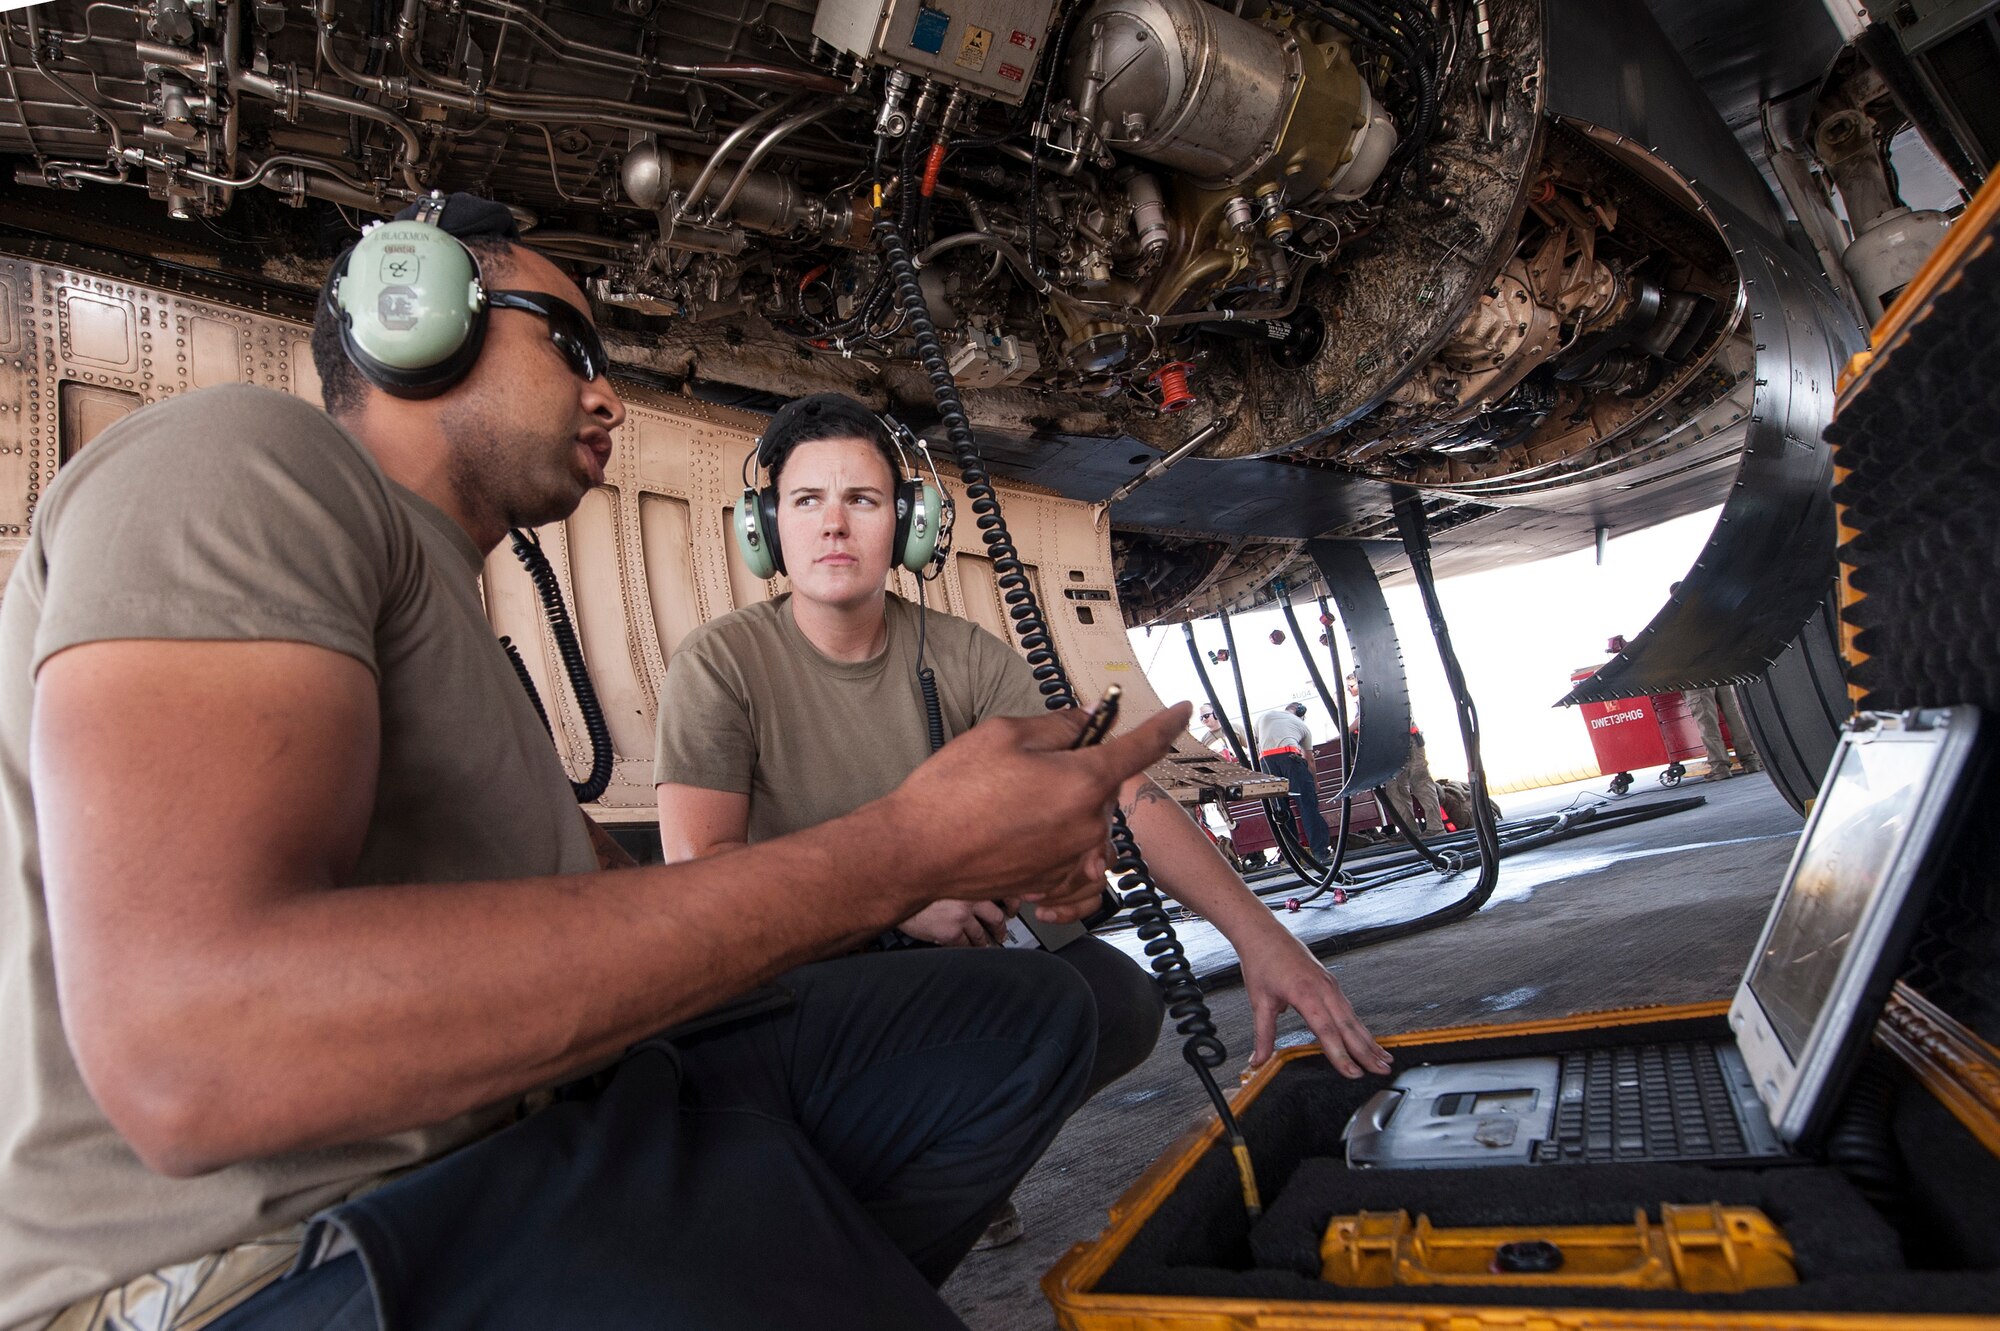 Staff Sgt. Jason Blackmon, left, 379th Expeditionary Aircraft Maintenance Squadron (EAMXS) B-1B Lancer propulsion craftsman, mentors Airman 1st Class Shelby Ries, 379th EAMXS B-1B Lancer propulsion apprentice, while conducting routine maintenance for a B-1B Lancer Dec. 22, 2018, at Al Udeid Air Base, Qatar. Ries was selected to deploy to Al Udeid as an advanced echelon (ADVON) team member. Ries led two engine changes and more than 90 maintenance actions which resulted in 56 B-1B sorties, totaling 672 flying hours. (U.S. Air Force photo by Tech. Sgt. Christopher Hubenthal)